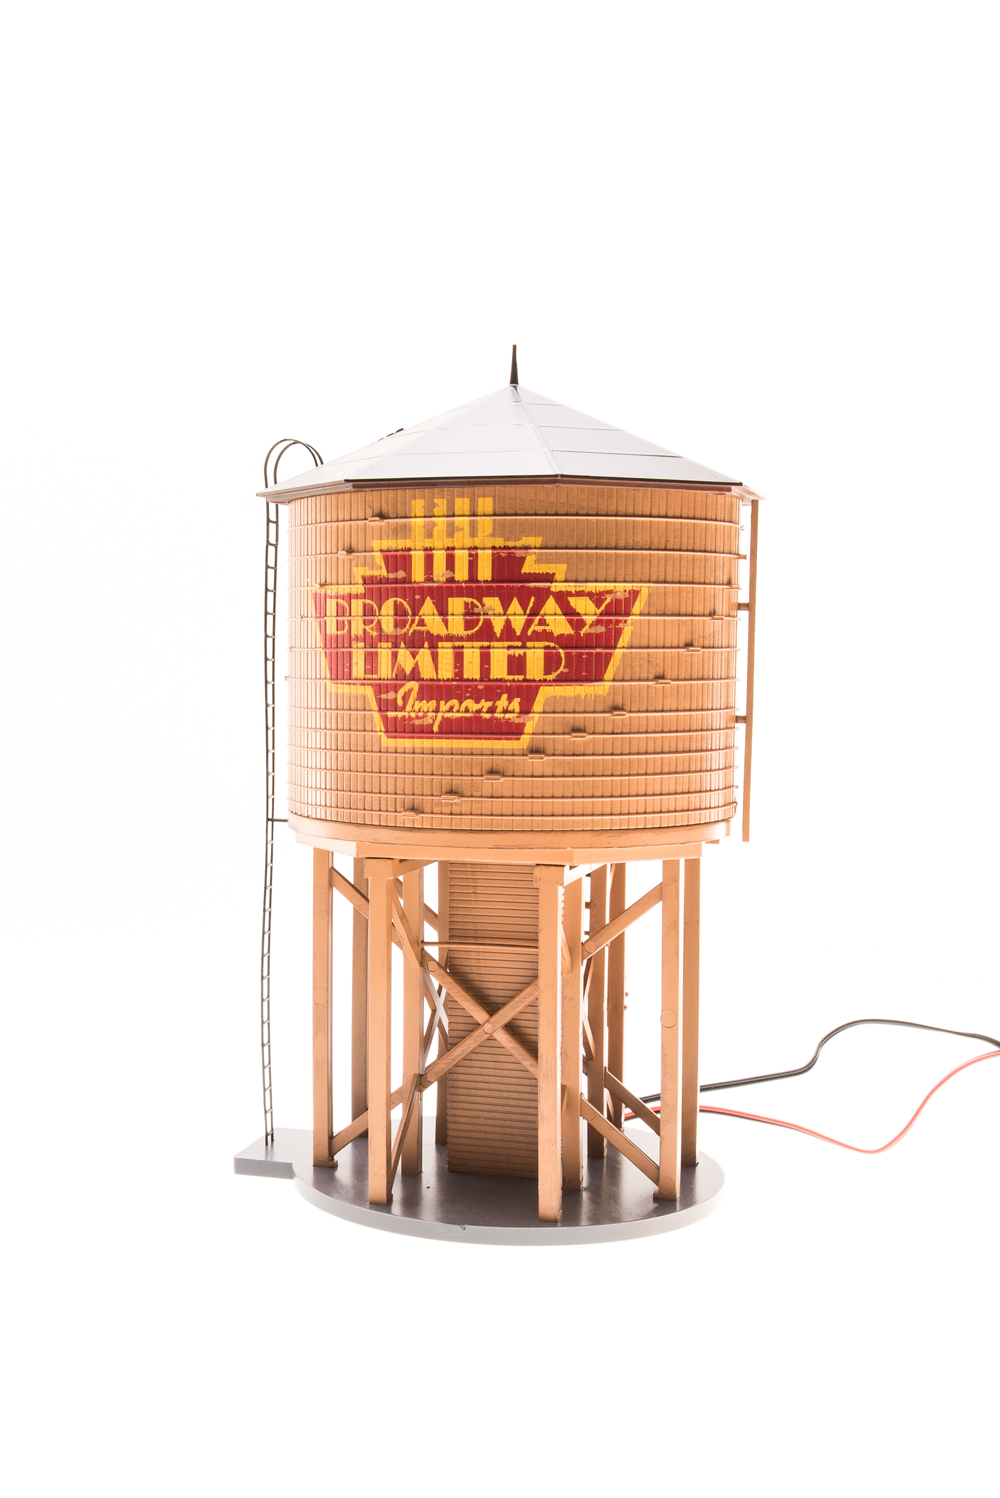 BLI-6097 Operating Water Tower w/ Sound, with BLI Logo, Weathered Brown, HO